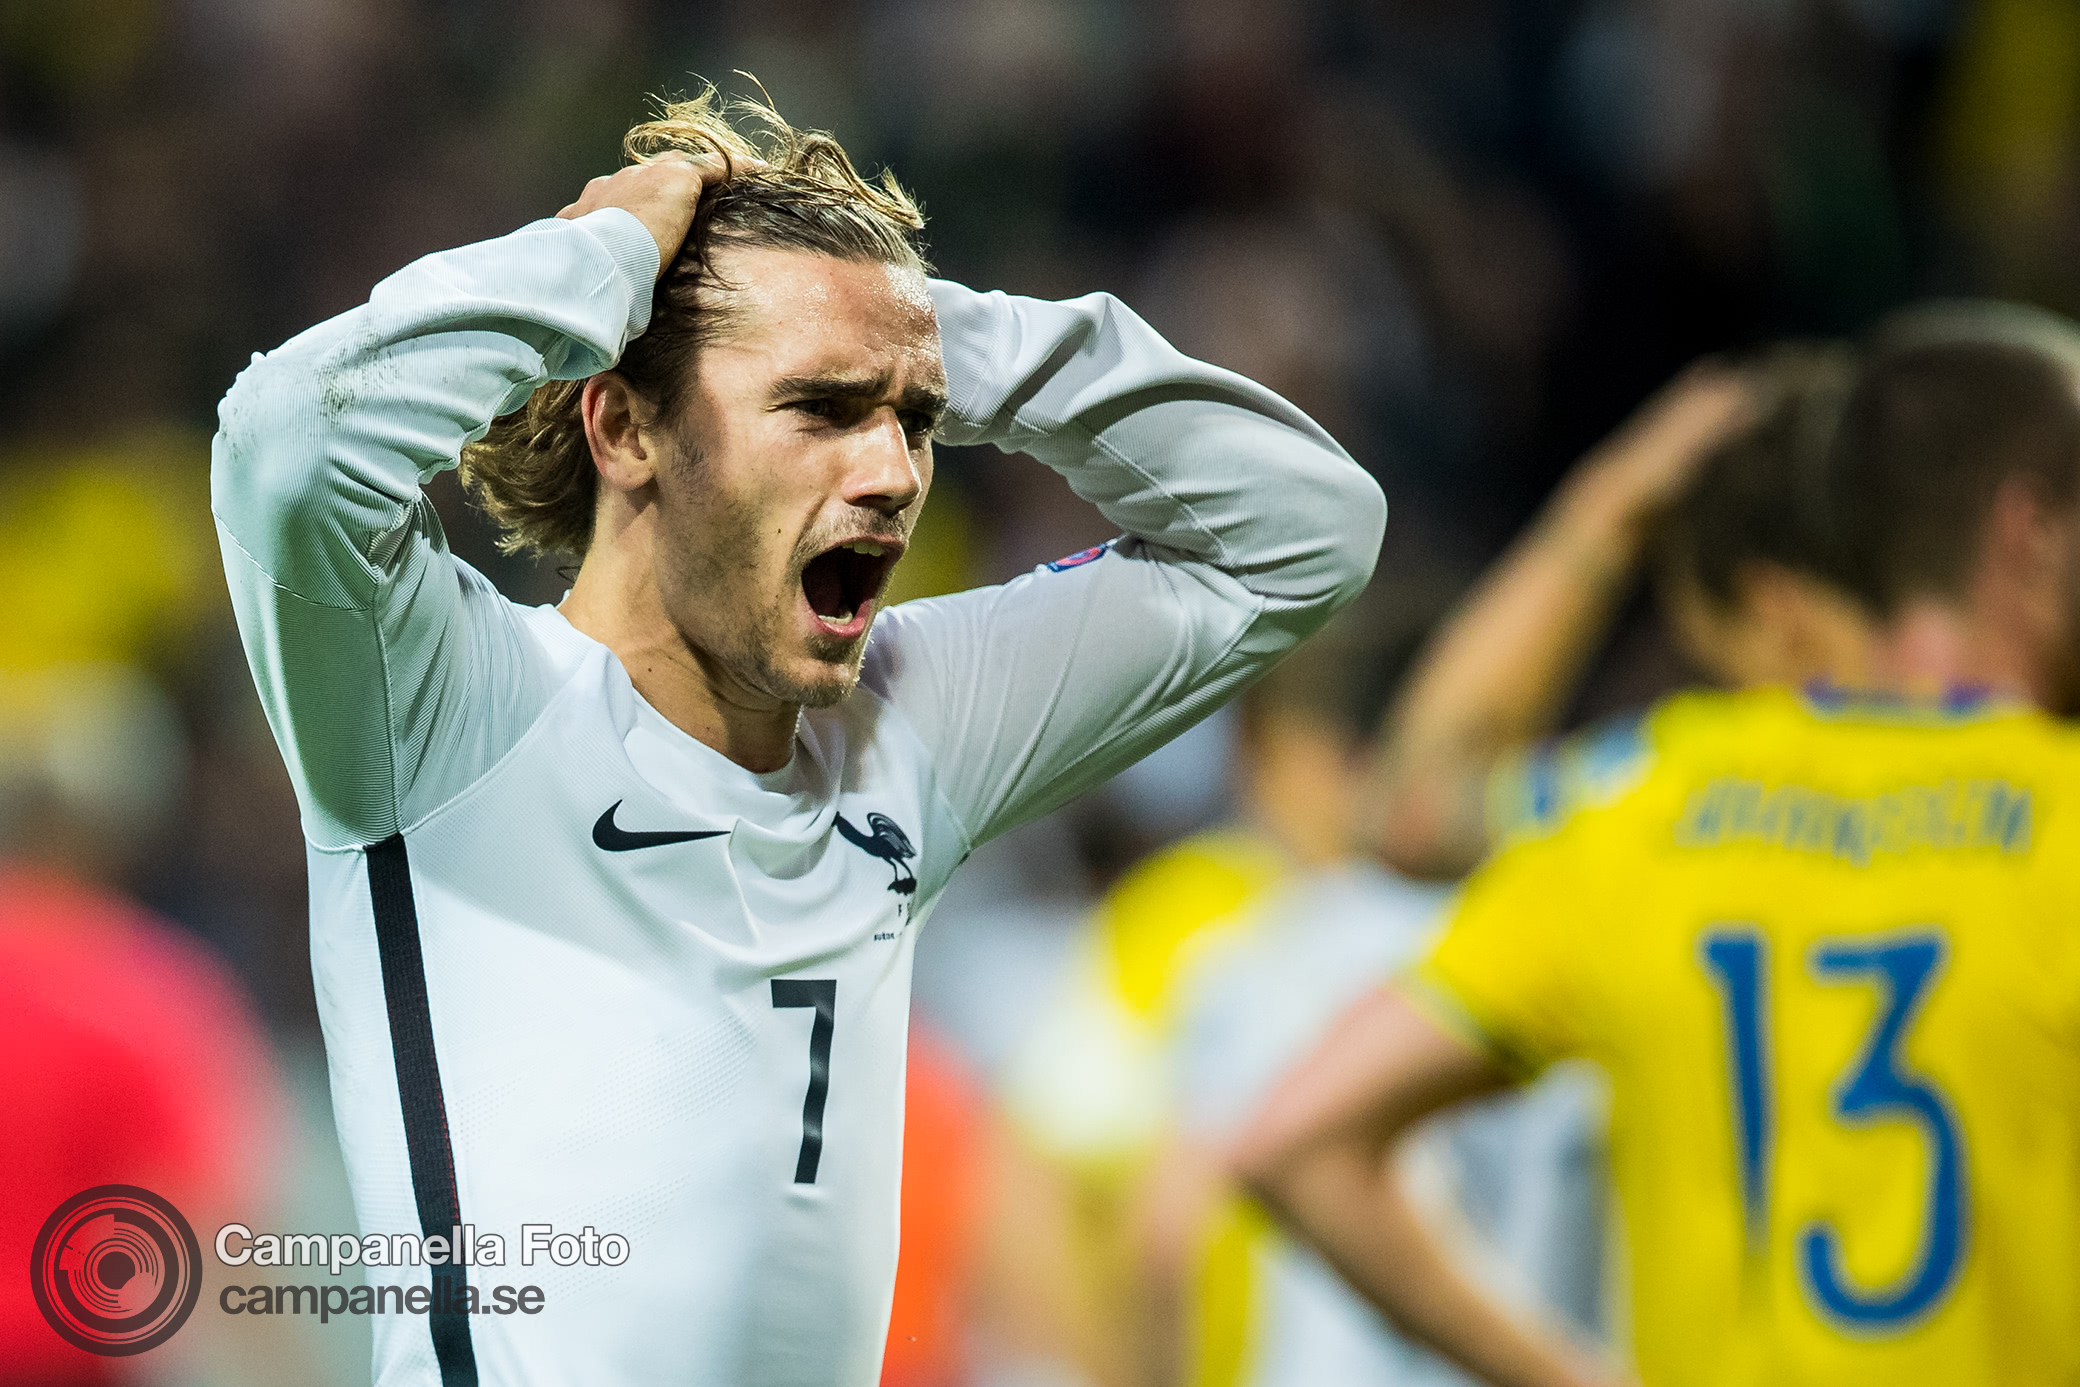 Sweden shocks France with last minute winner - Michael Campanella Photography